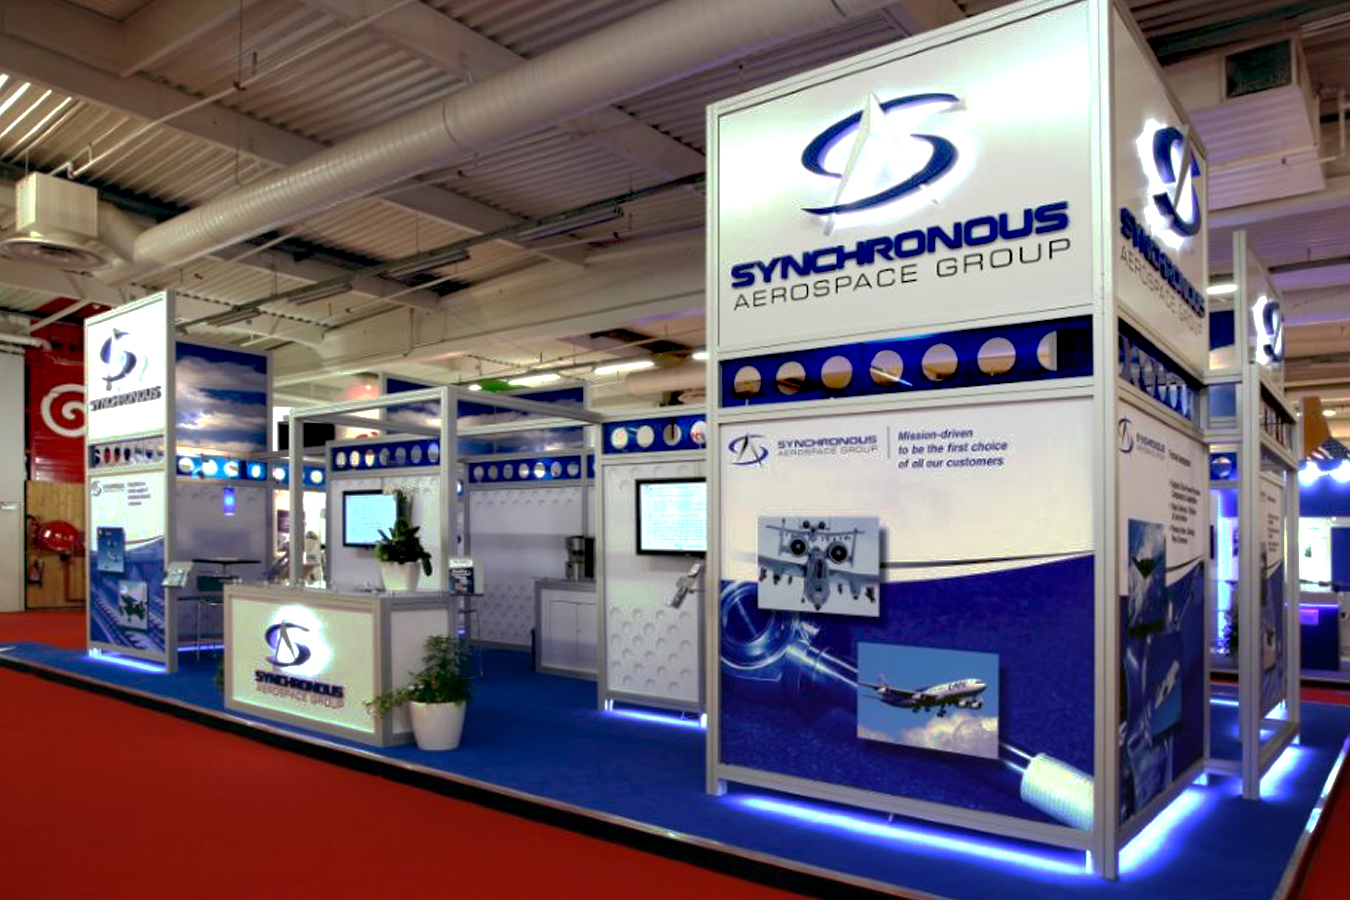 Synchronous Aerospace Group Booth